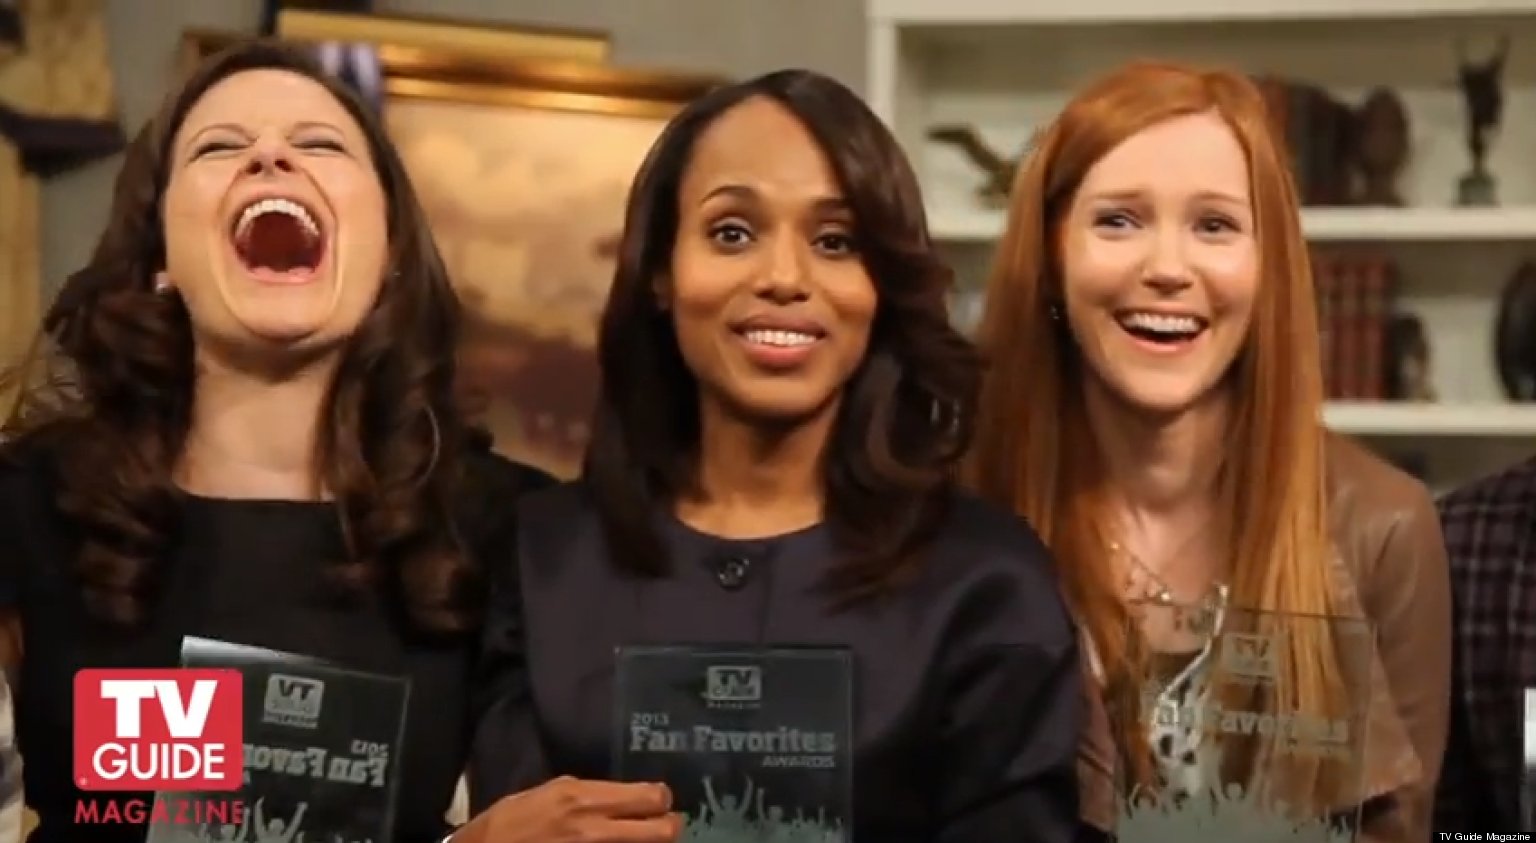 Scandal Cast Adorably And Excitedly Accepts Tv Guide Magazine Fan Favorite Awards Video 